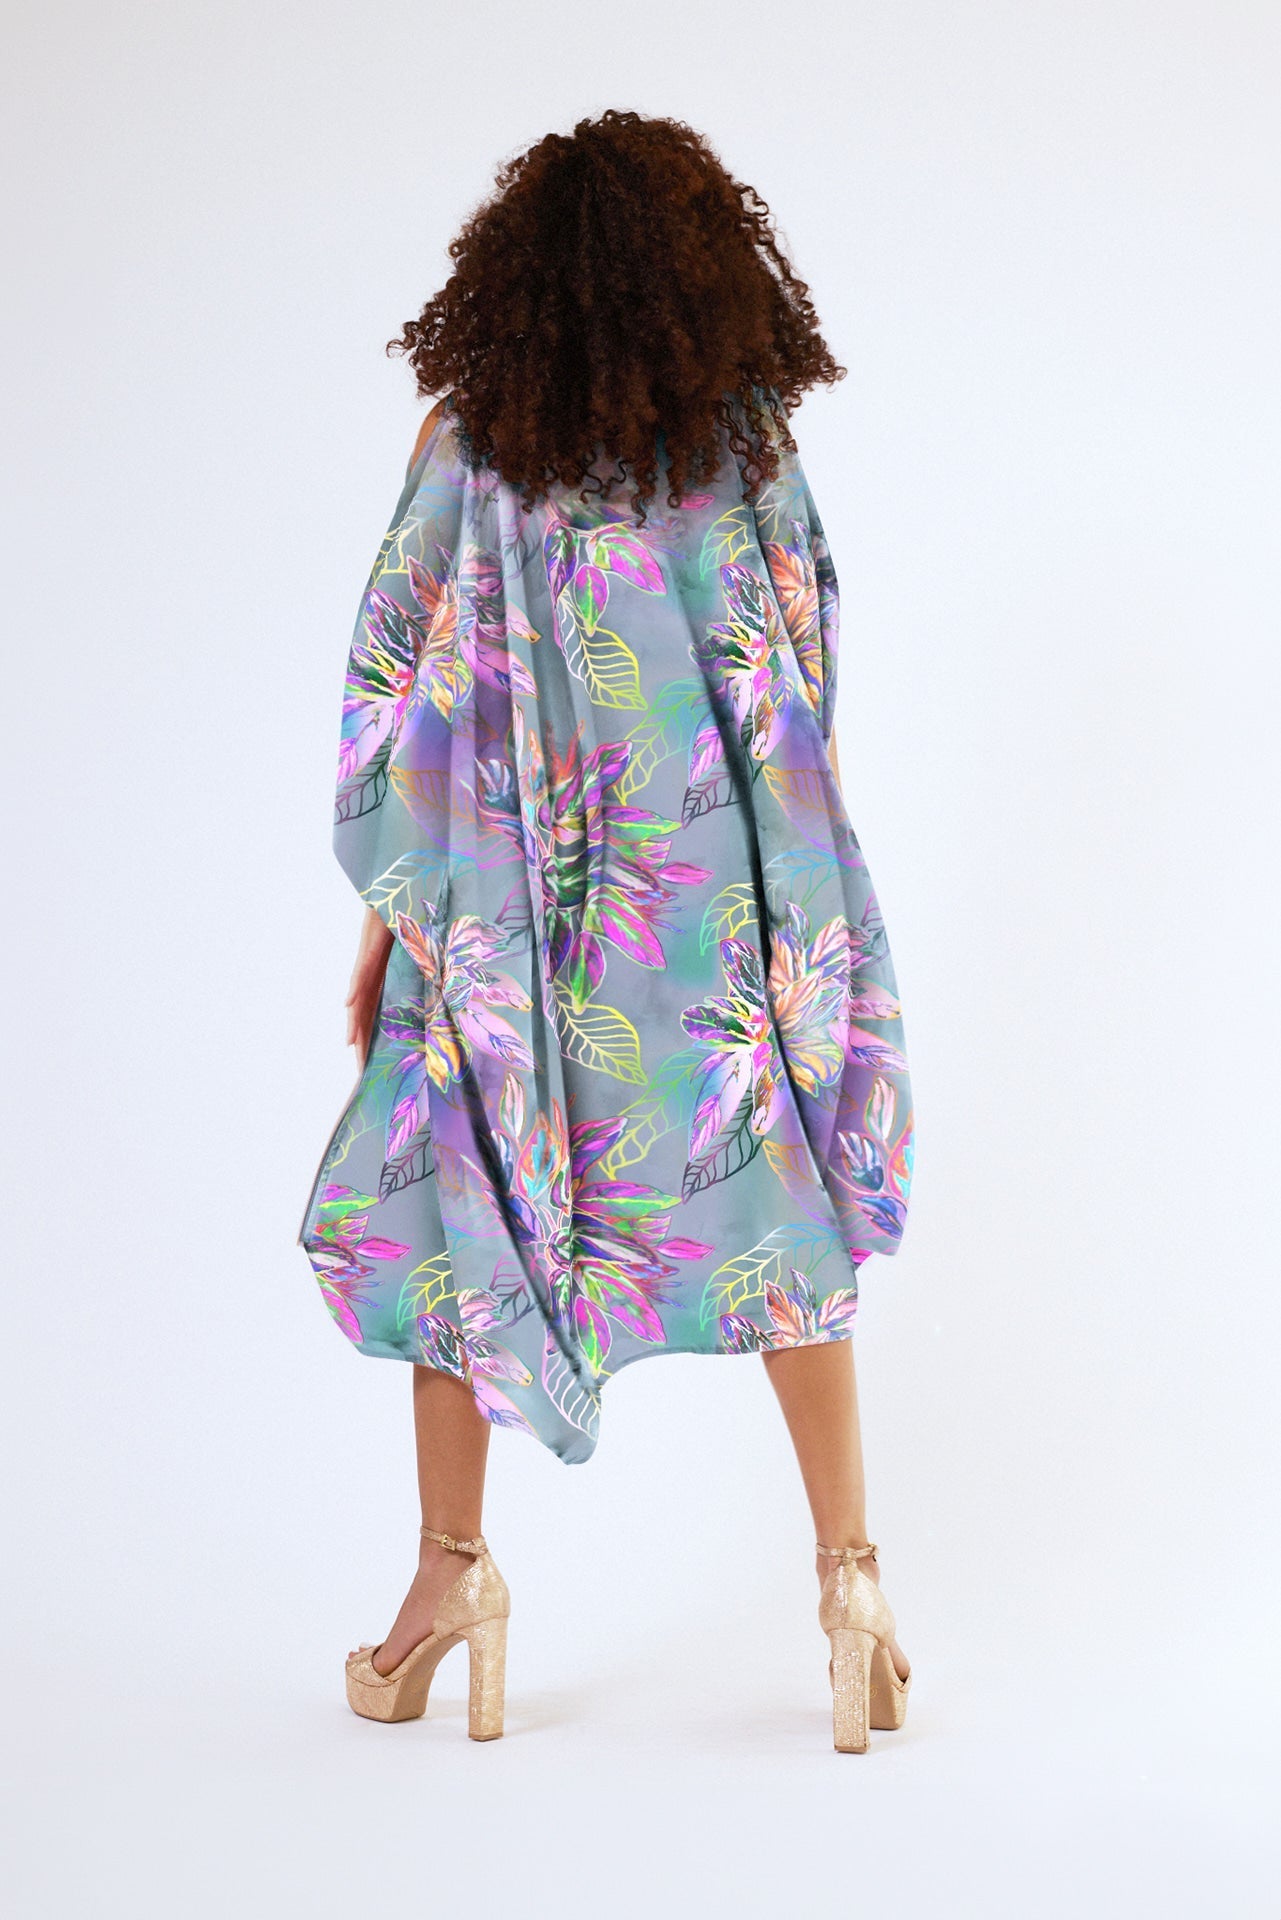 back view of woman wearing all over tropical print kaftan duster with front zipper made from recycled materials